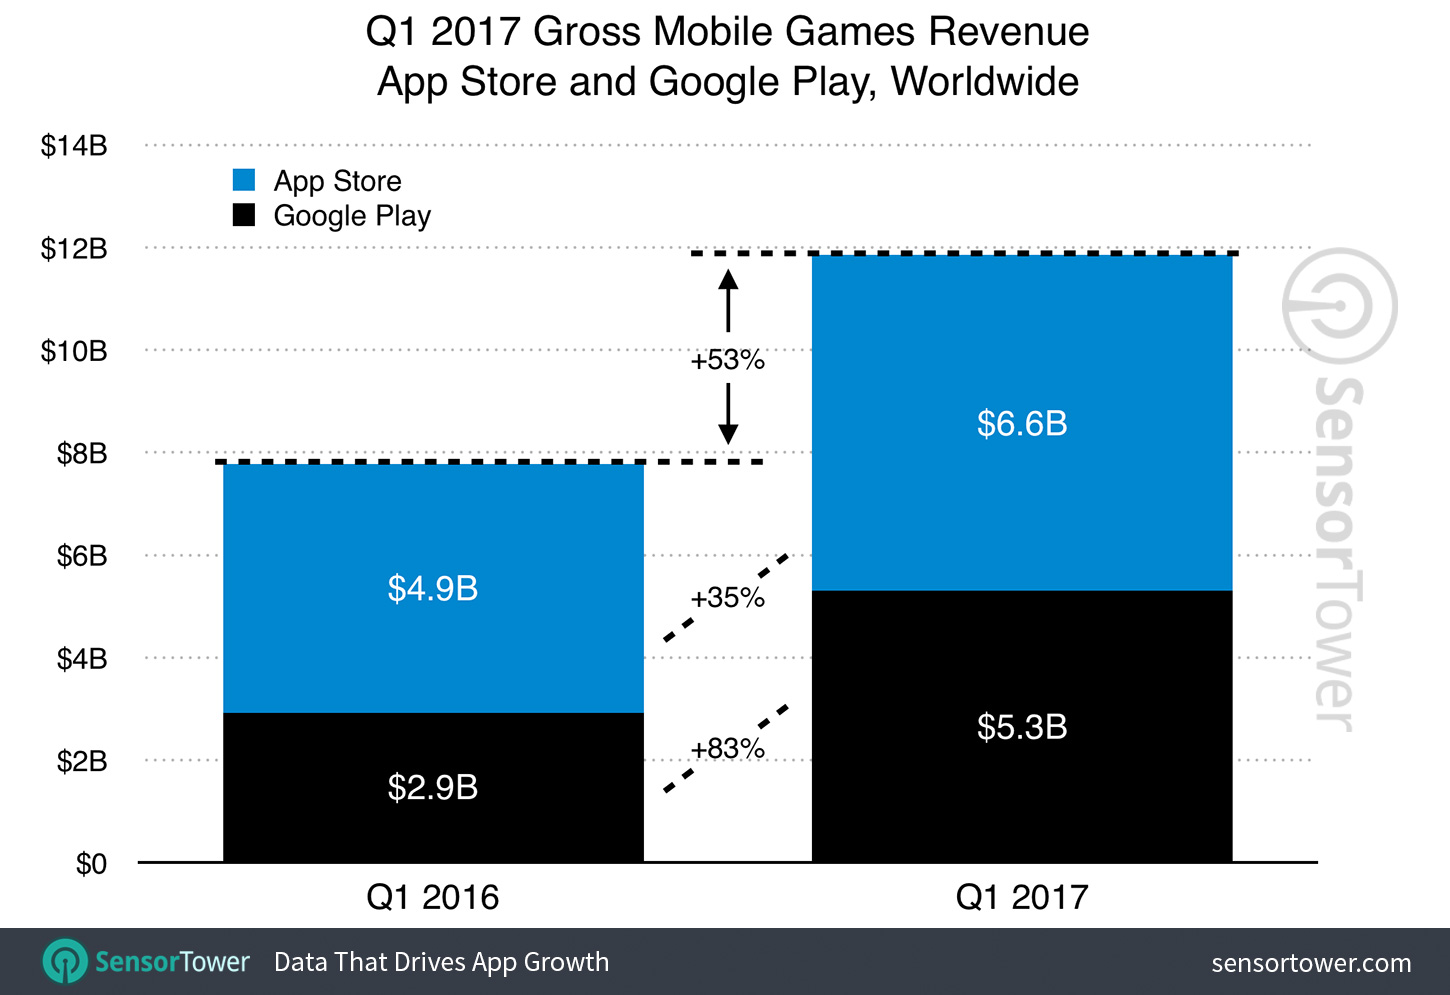 Q1 2017 Games Category Worldwide Revenue Growth